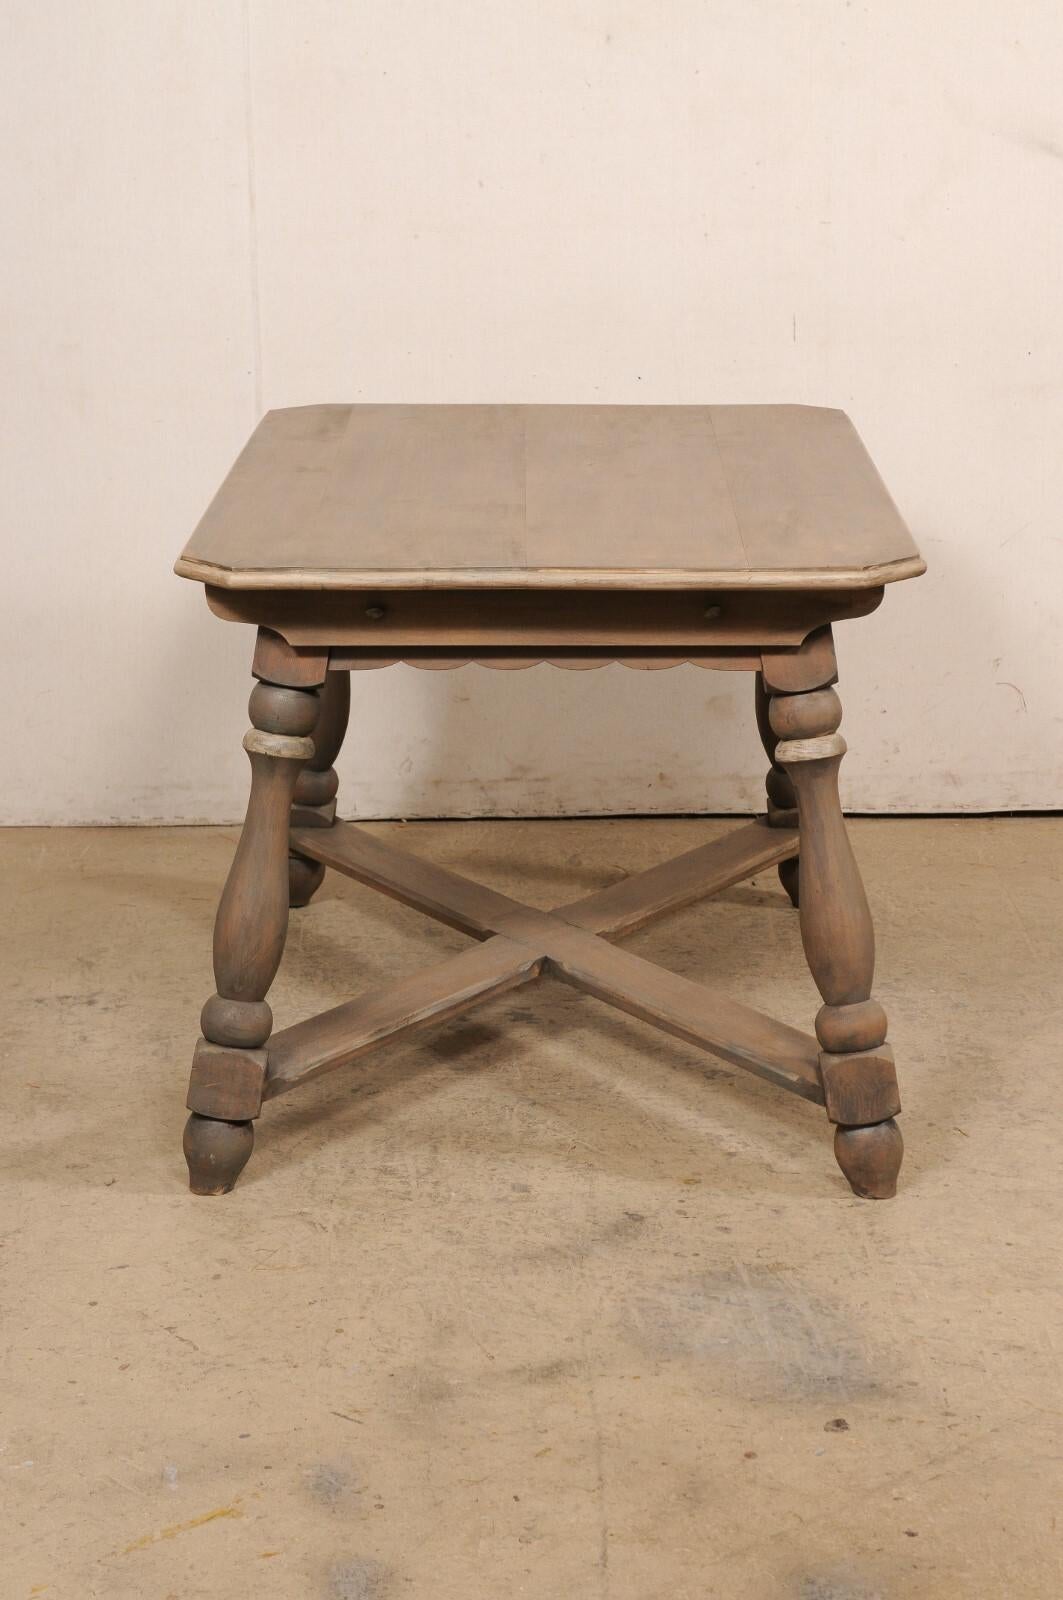 European Wooden Table w/Scalloped Apron, Nicely Turned Legs & X-Stretcher For Sale 3